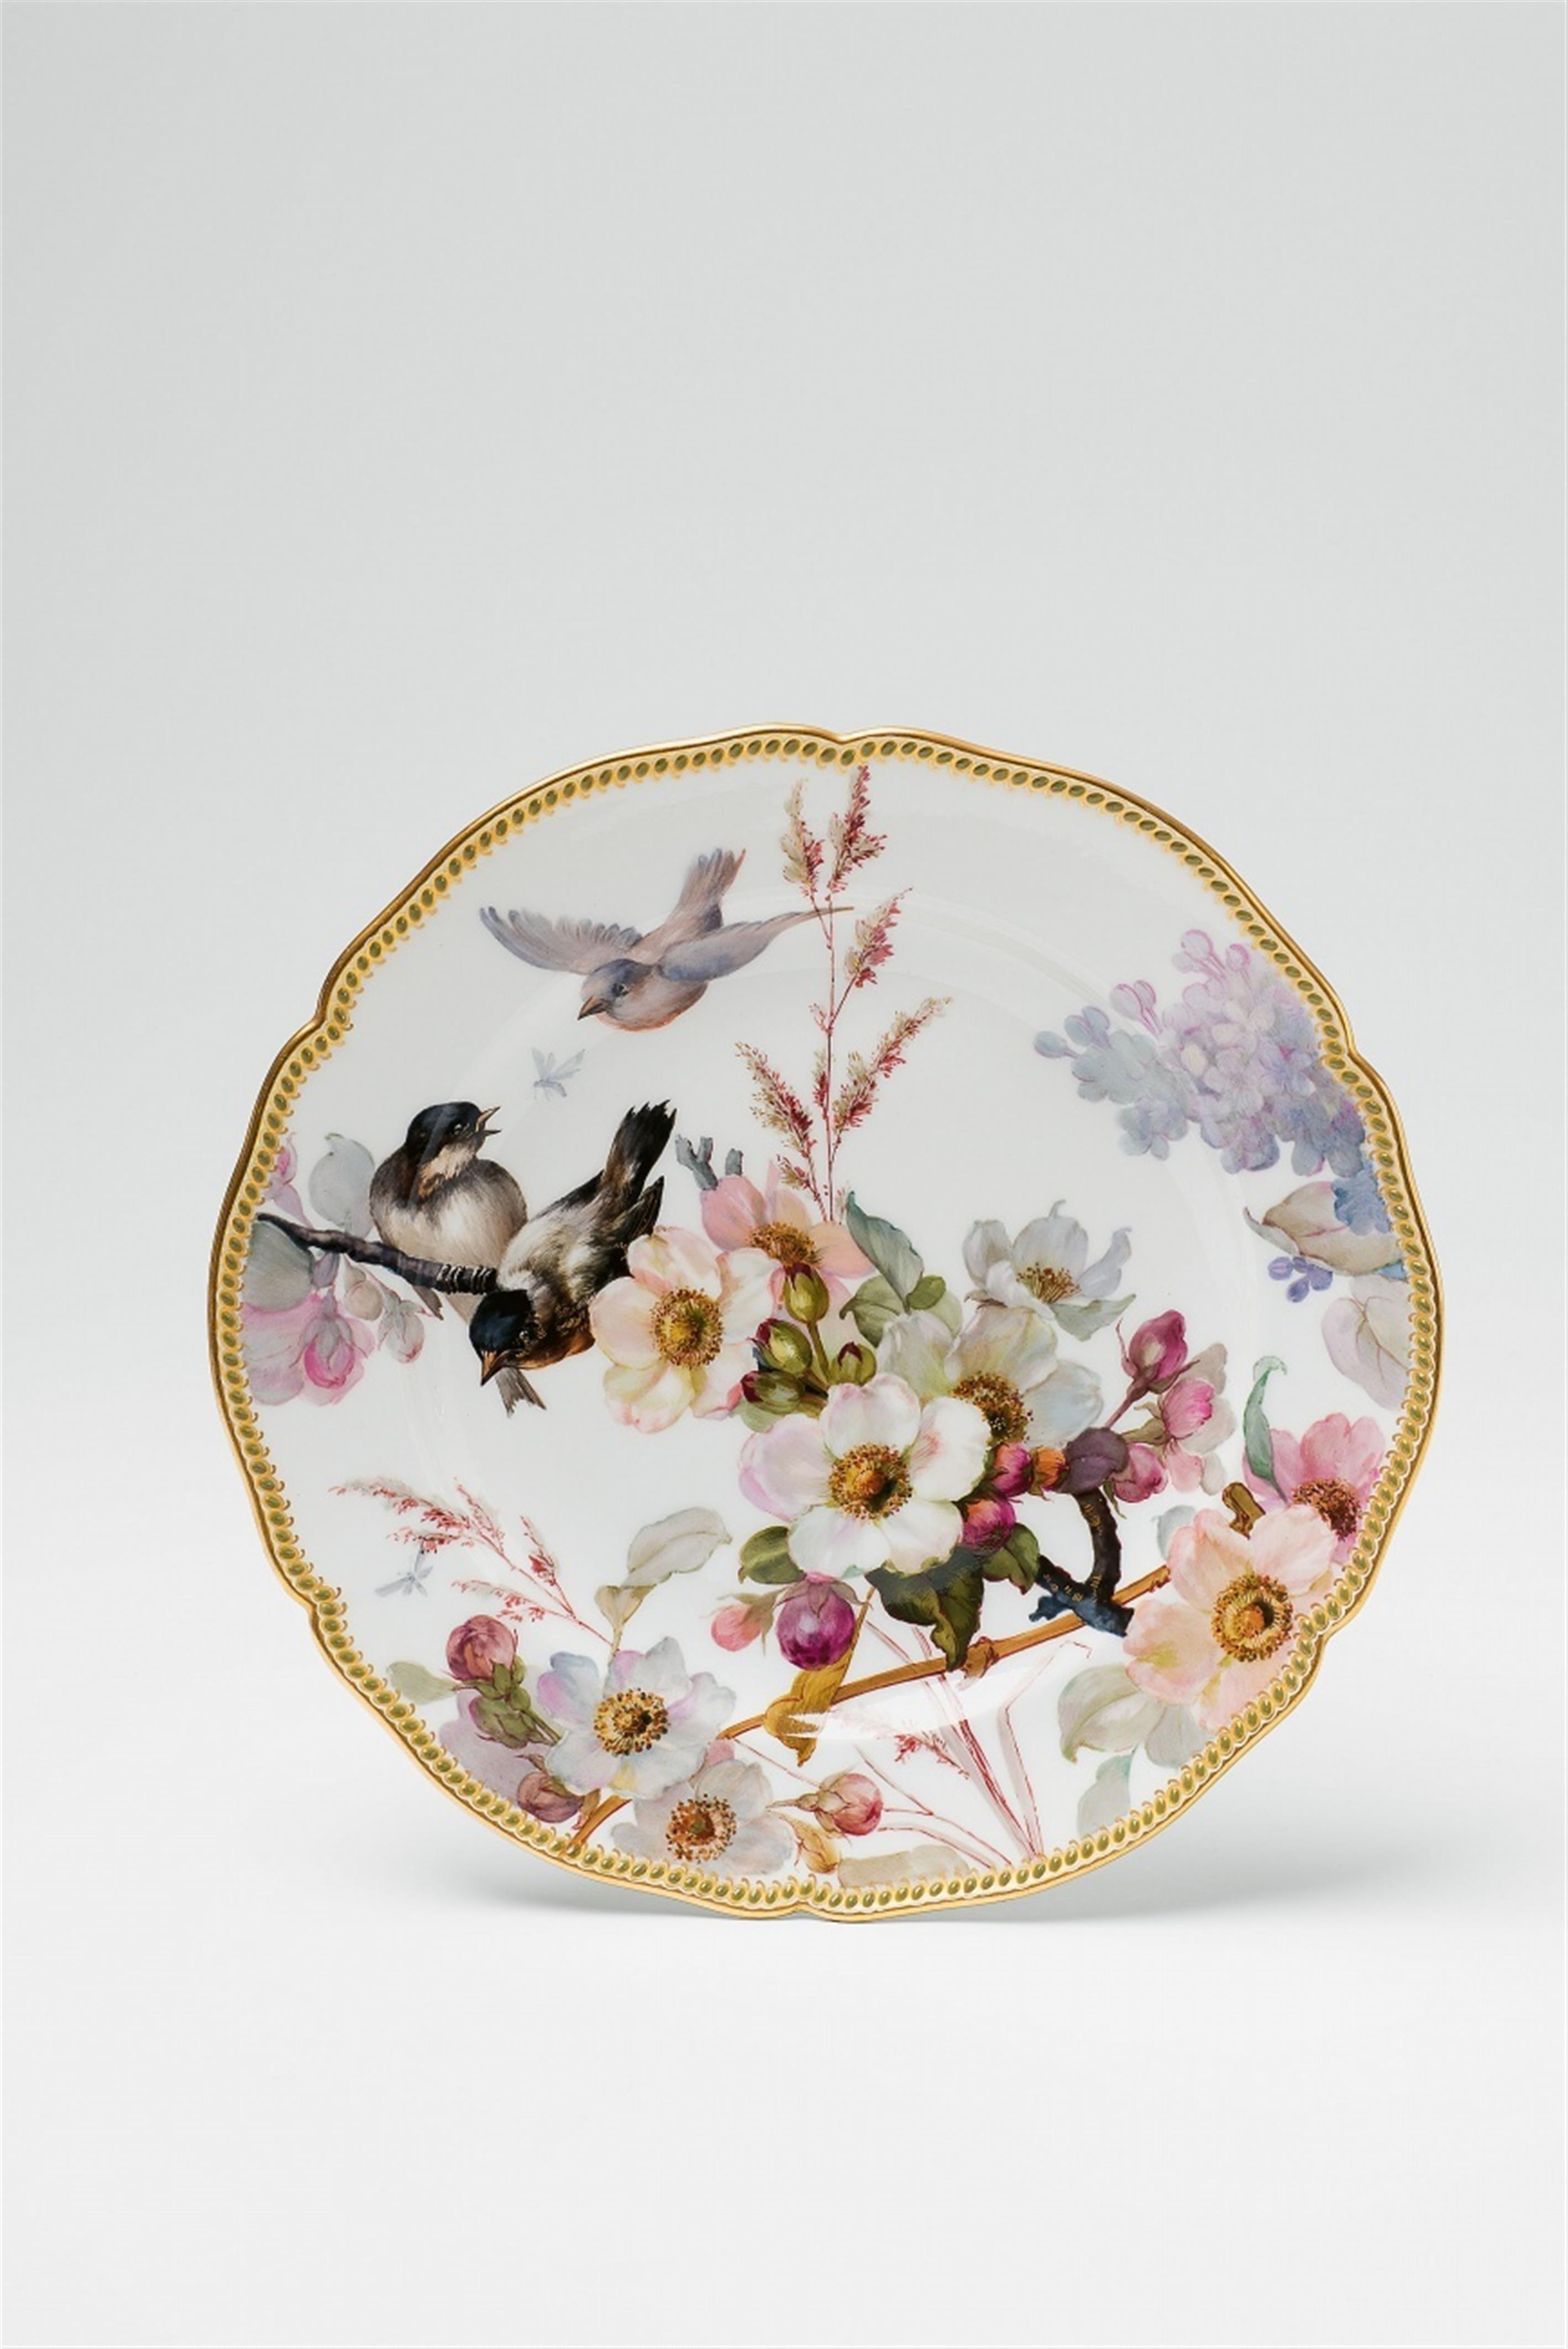 A Berlin KPM porcelain plate with dog roses and birds - image-1